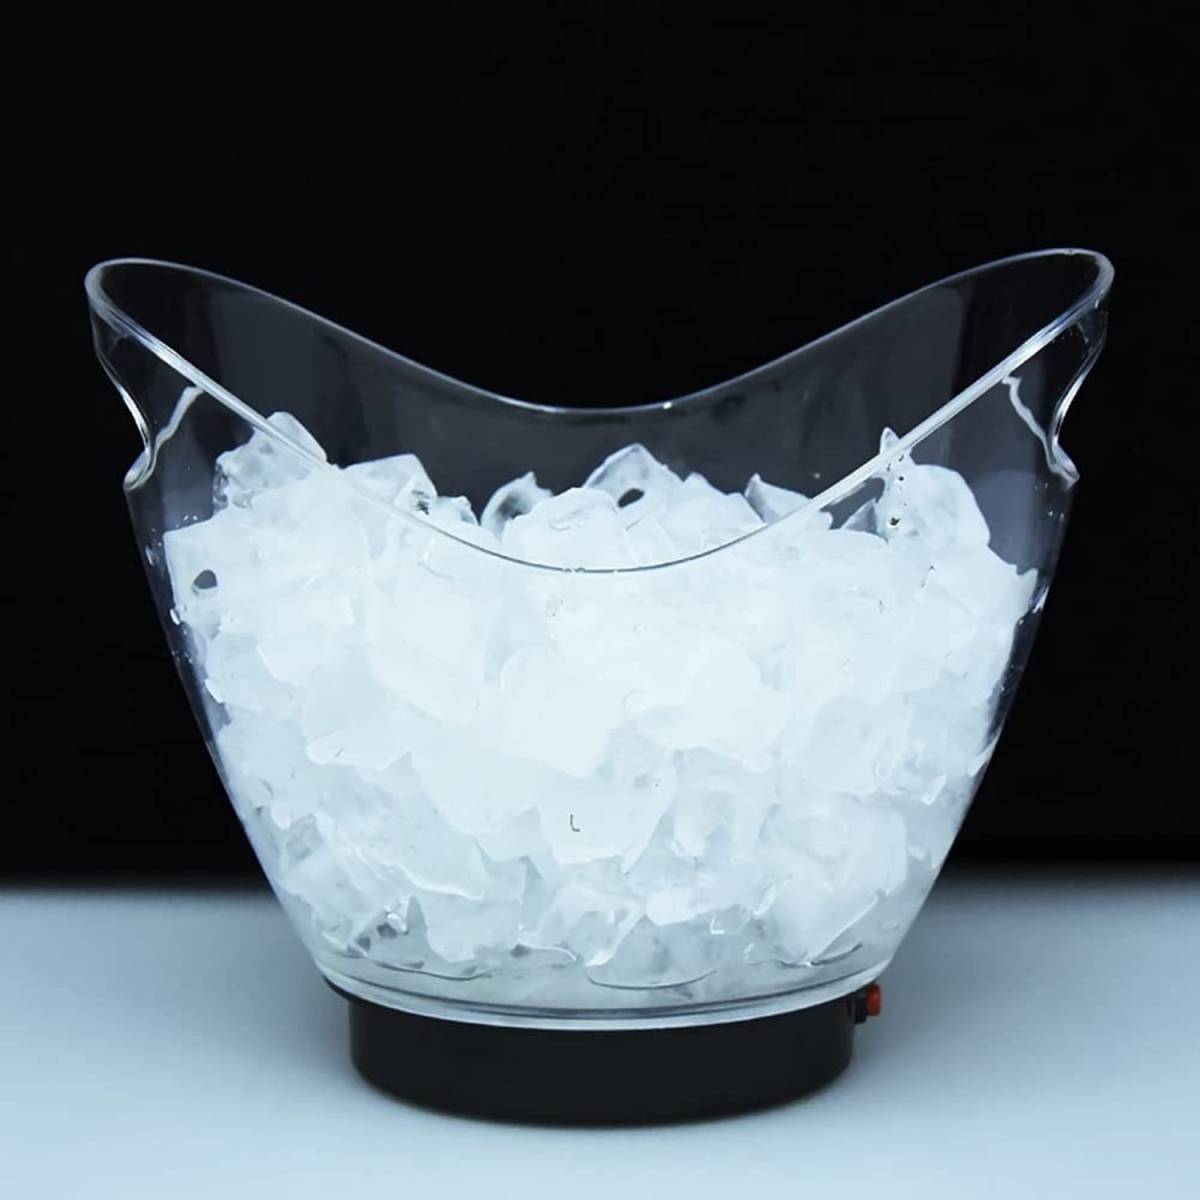  cocktail cooler,air conditioner 2L high capacity LED ice basket Home bar stylish presence eminent! light weight light. diffused reflection feeling of luxury overflow neon light atmosphere making 